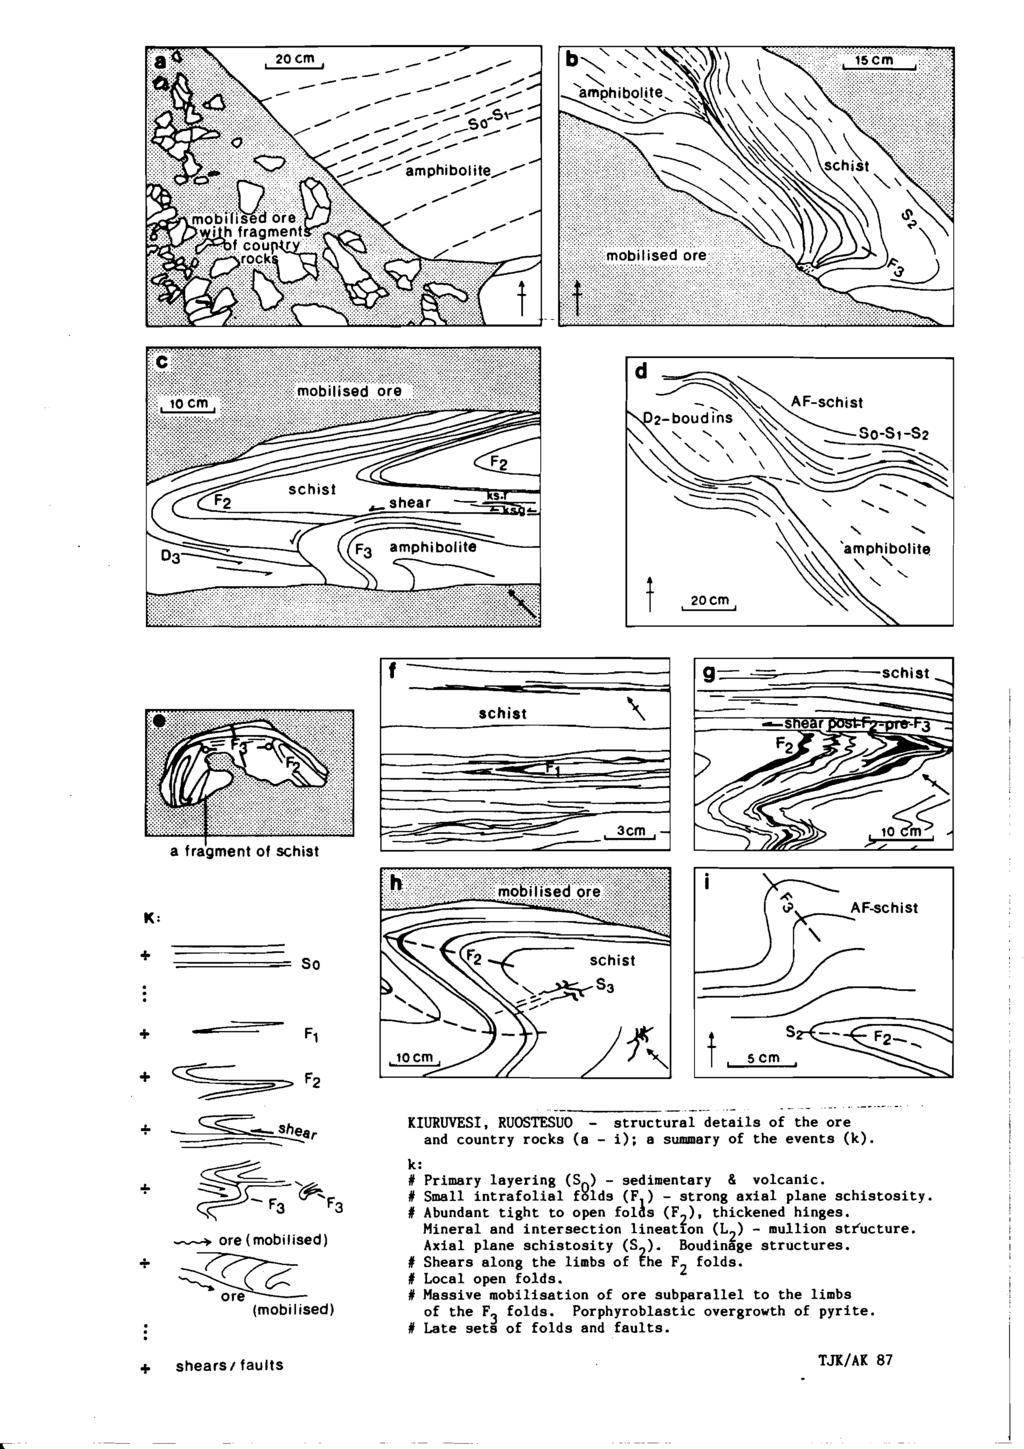 ' amphibolite,' a frigment of schist + 4 ore (mobilised) (mobilised) -- - _.. ---- - KURUVES. RUOSTESUO - structural details of the ore and country rocks (a - i); a summary of the events (k).